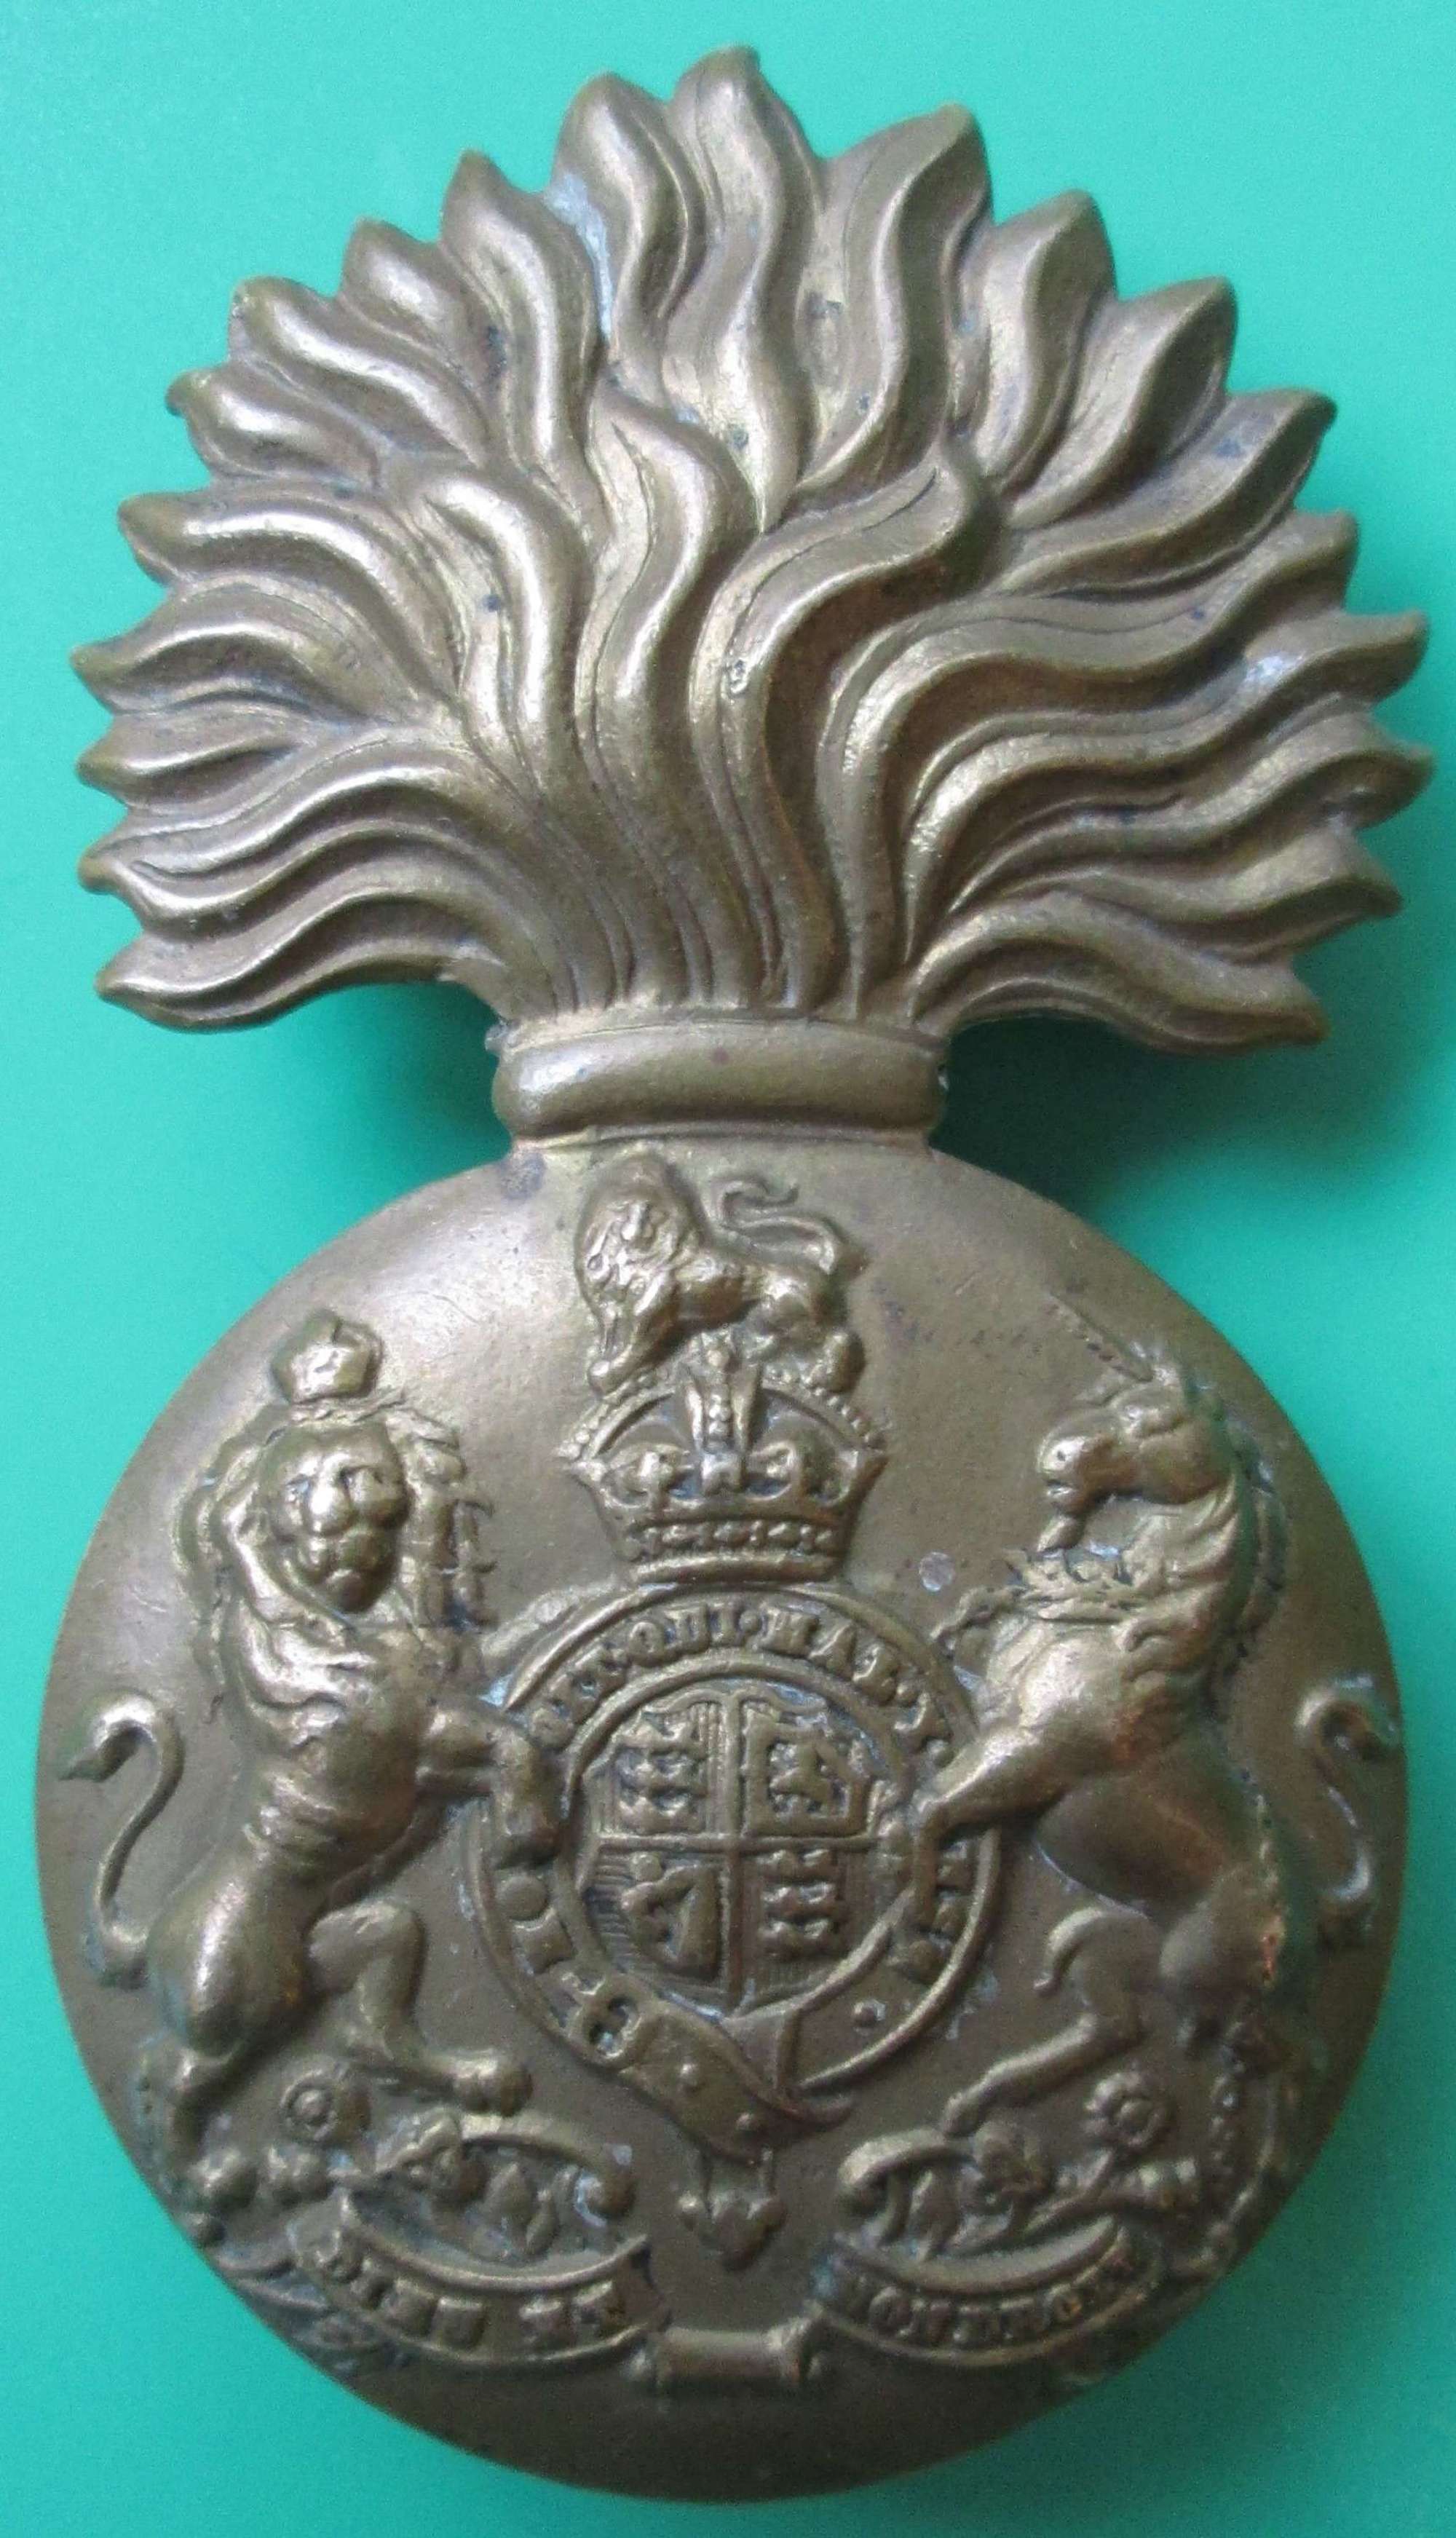 ROYAL SCOTS FUSILIERS GLENGARRY BADGE